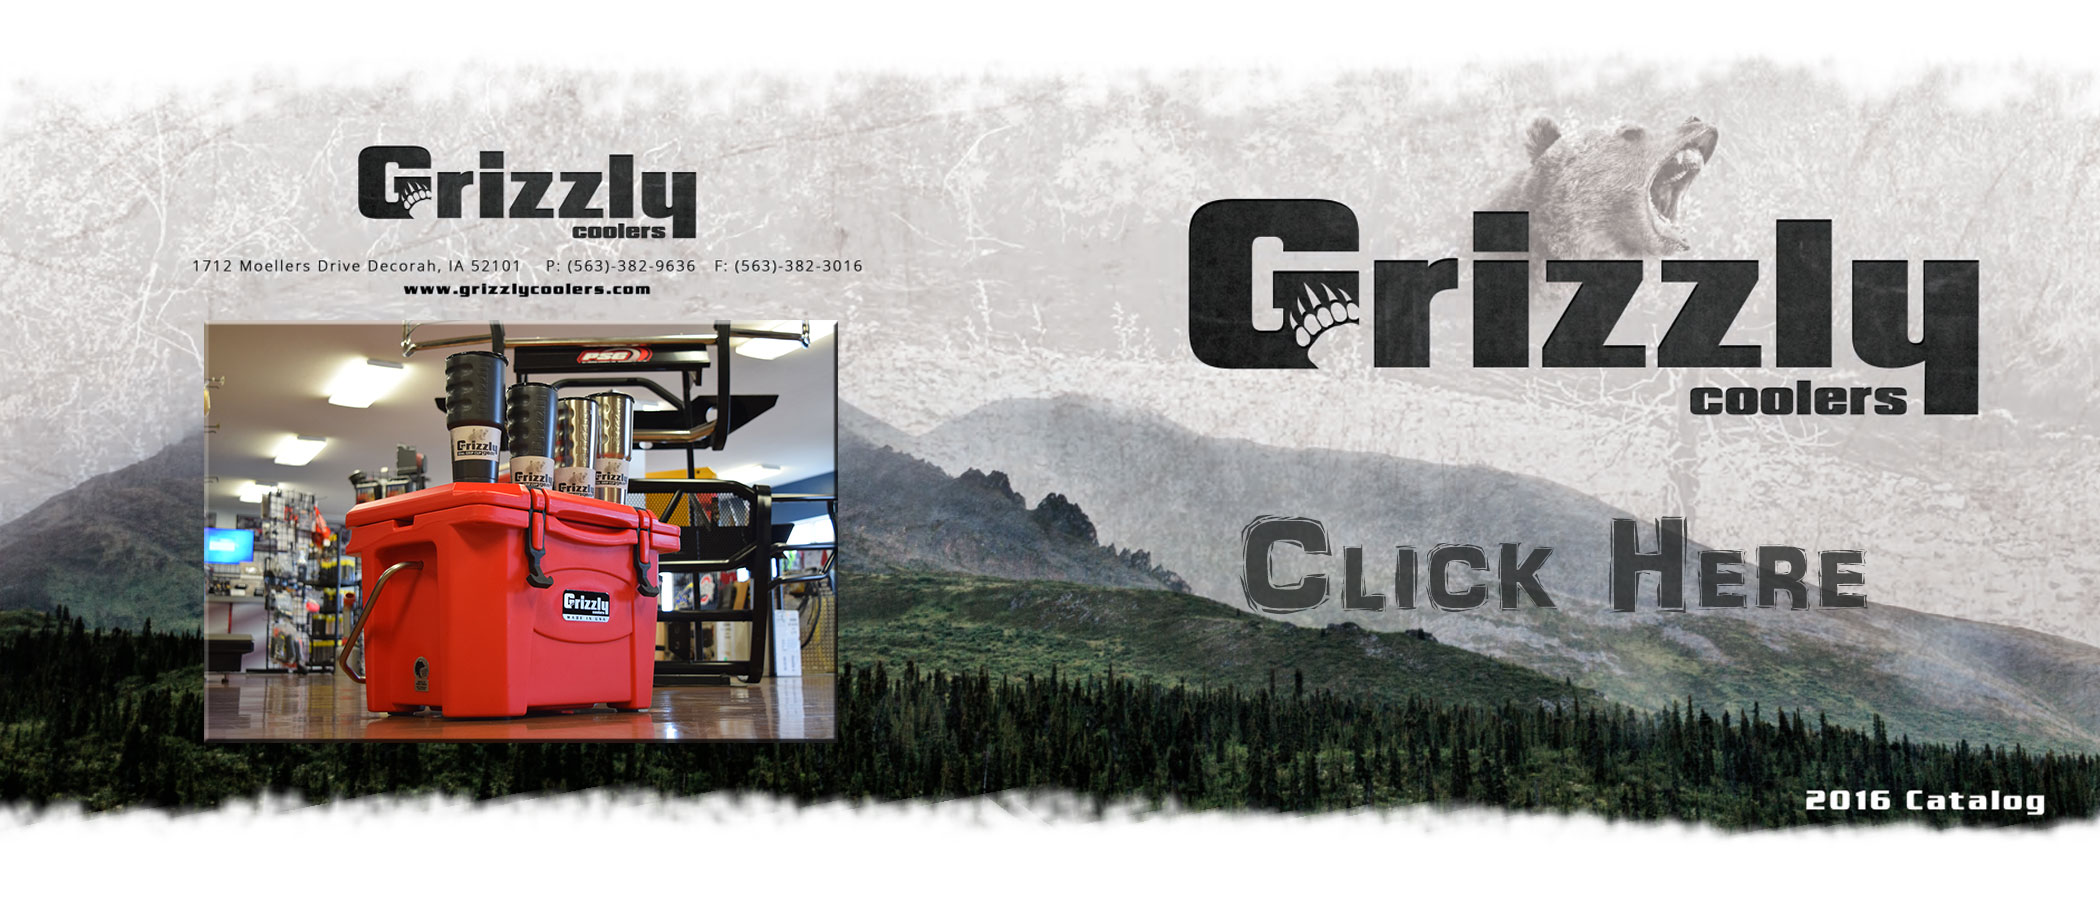 Grizzly Coolers Catalog